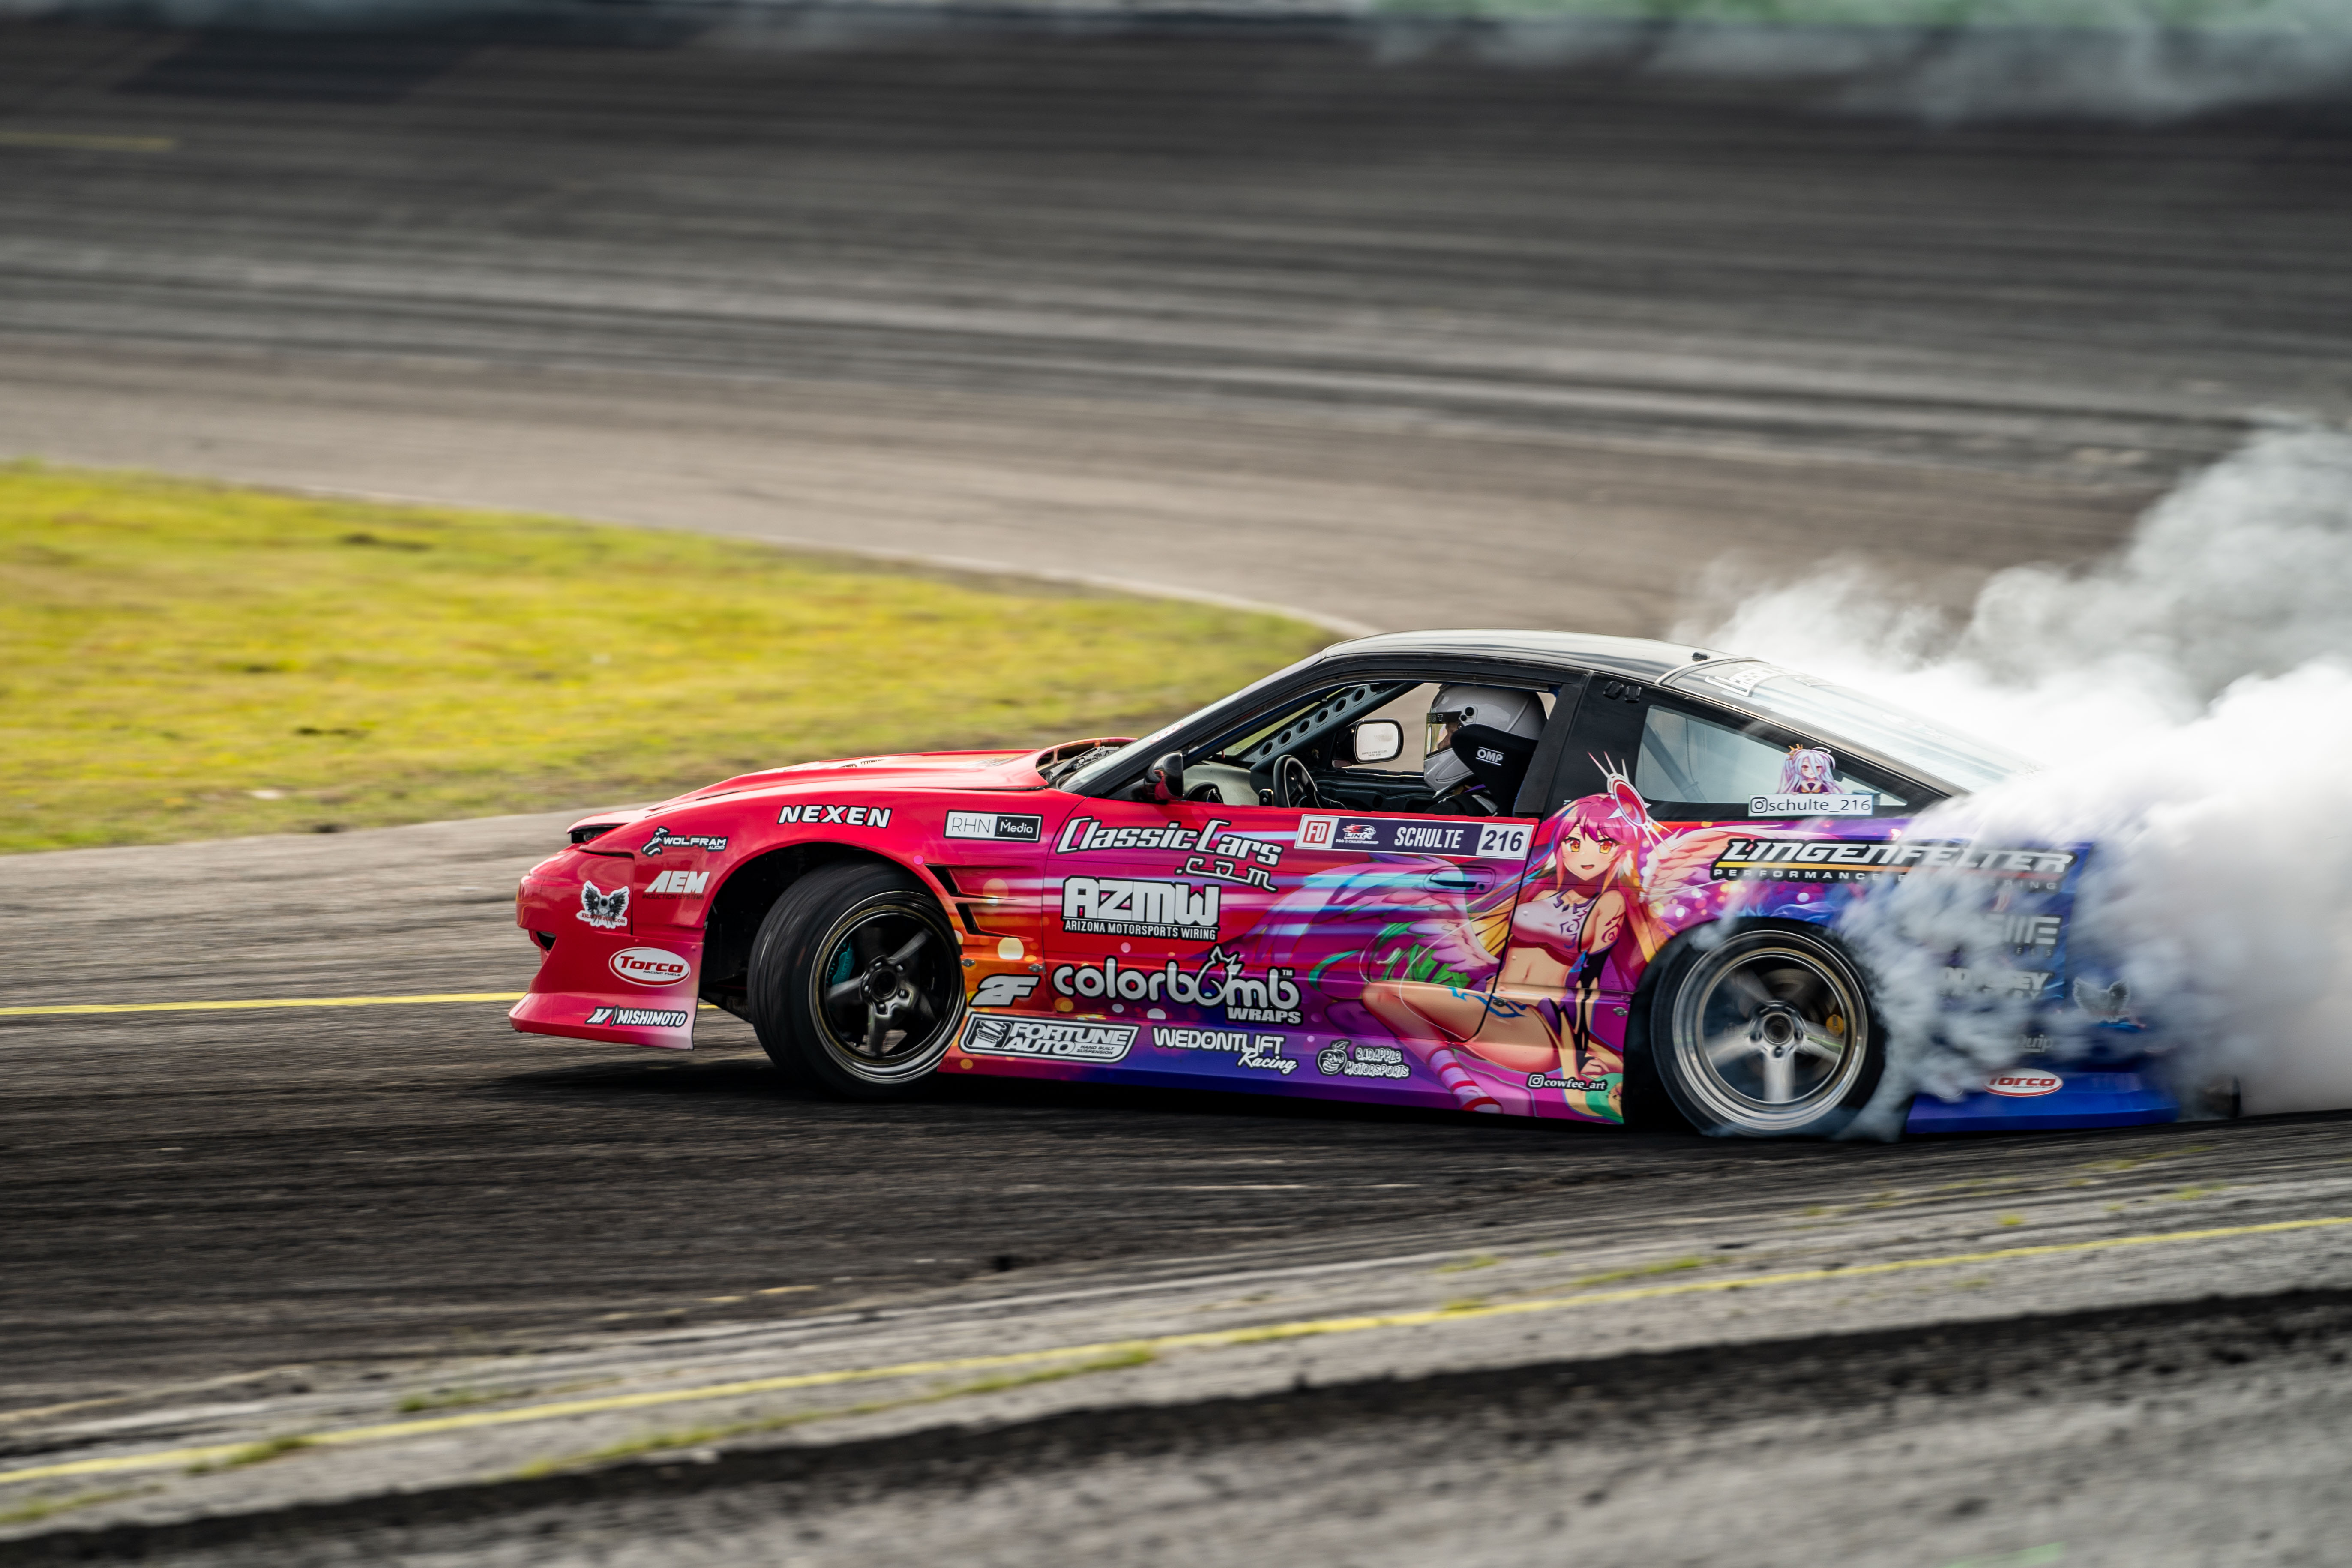 Formula Drift, Wrapped, wired and making the best of Orlando, ClassicCars.com Journal